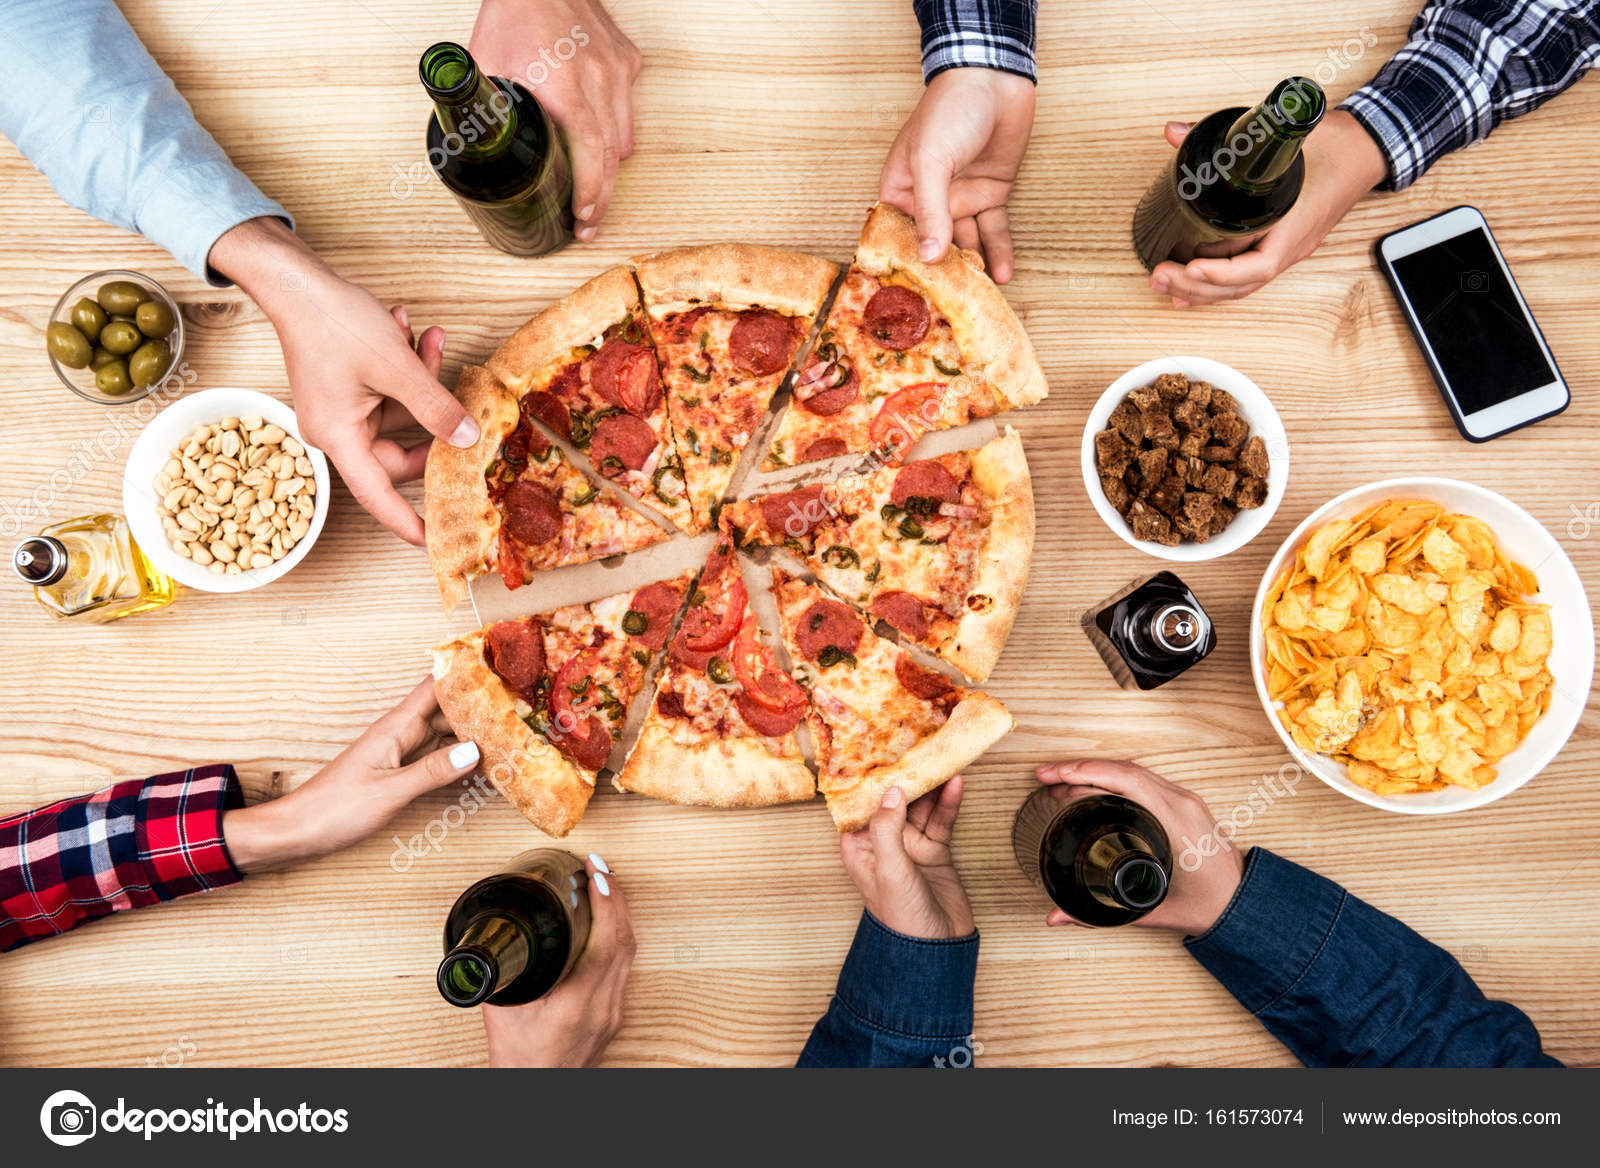 Eating Pizza. Friends Image & Photo (Free Trial)